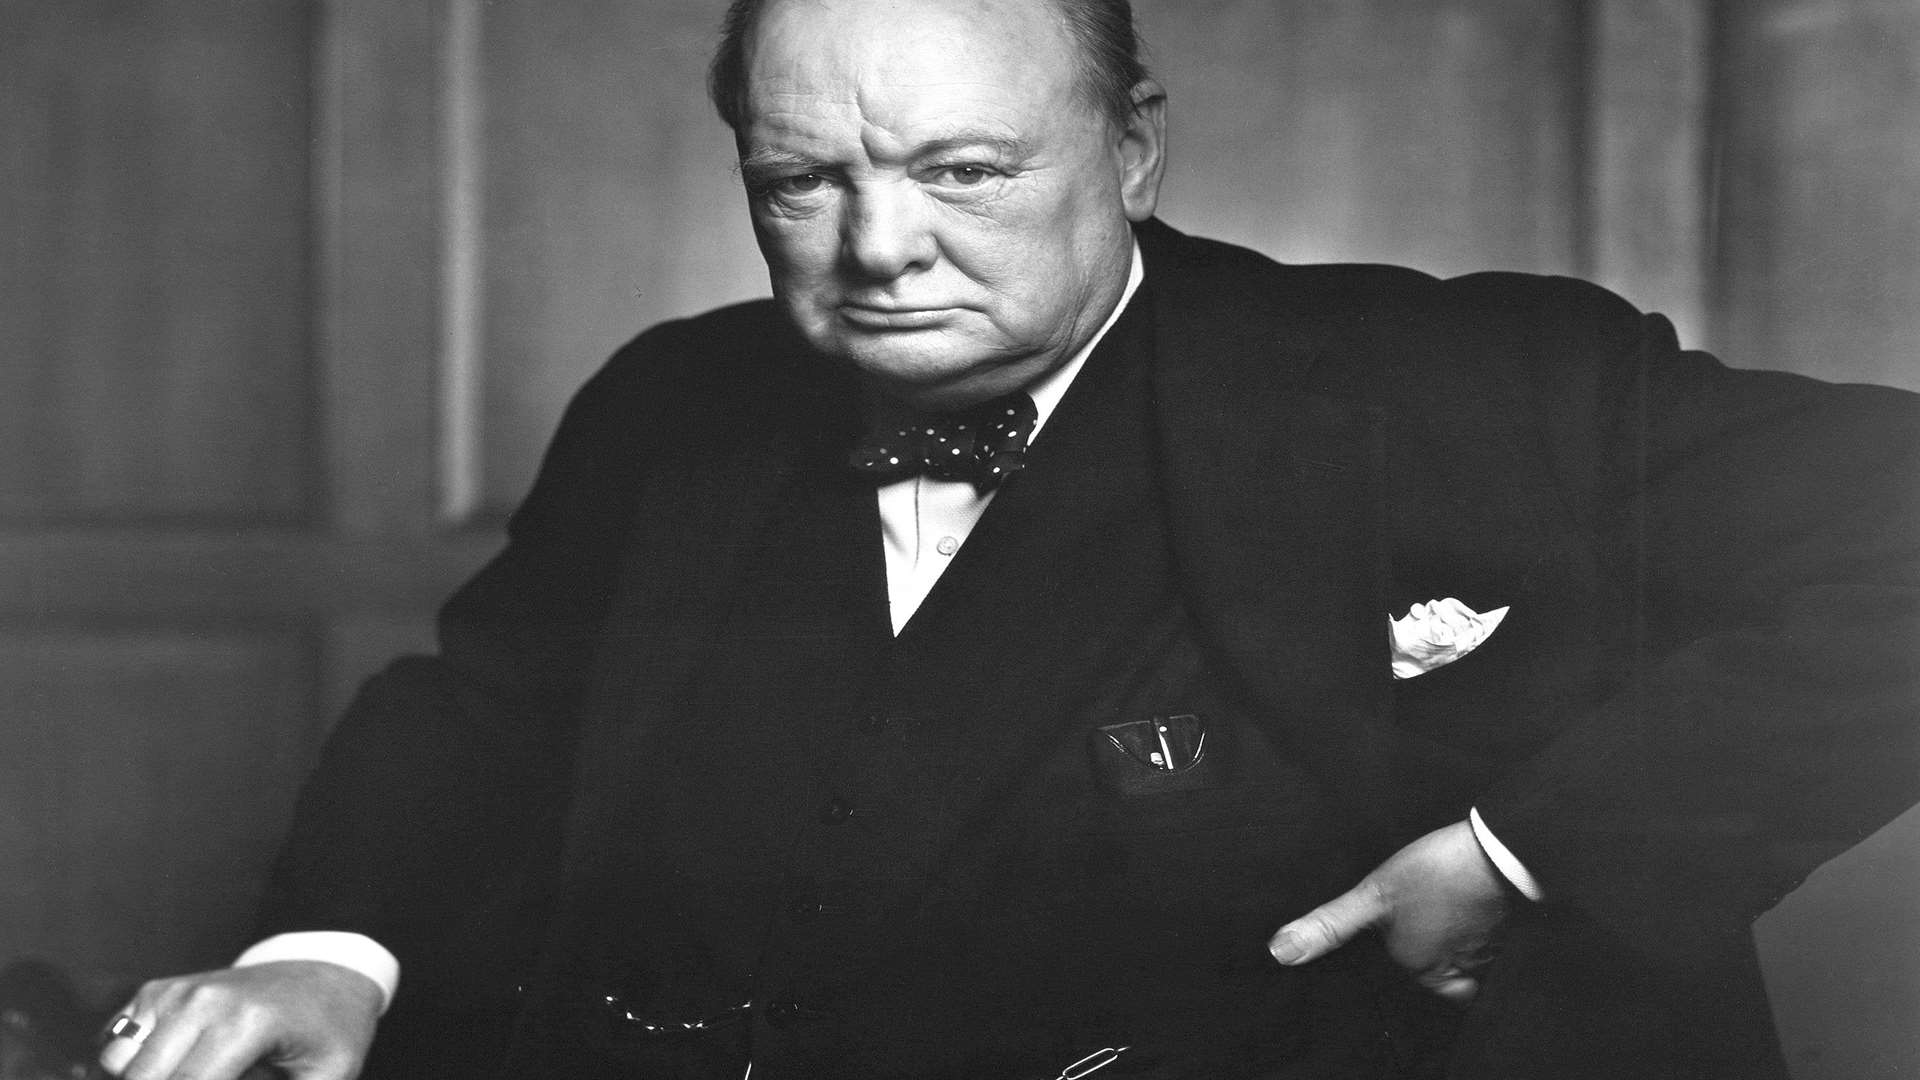 Wartime leader Churchill is believed to have smoked 250,000 cigars during his lifetime